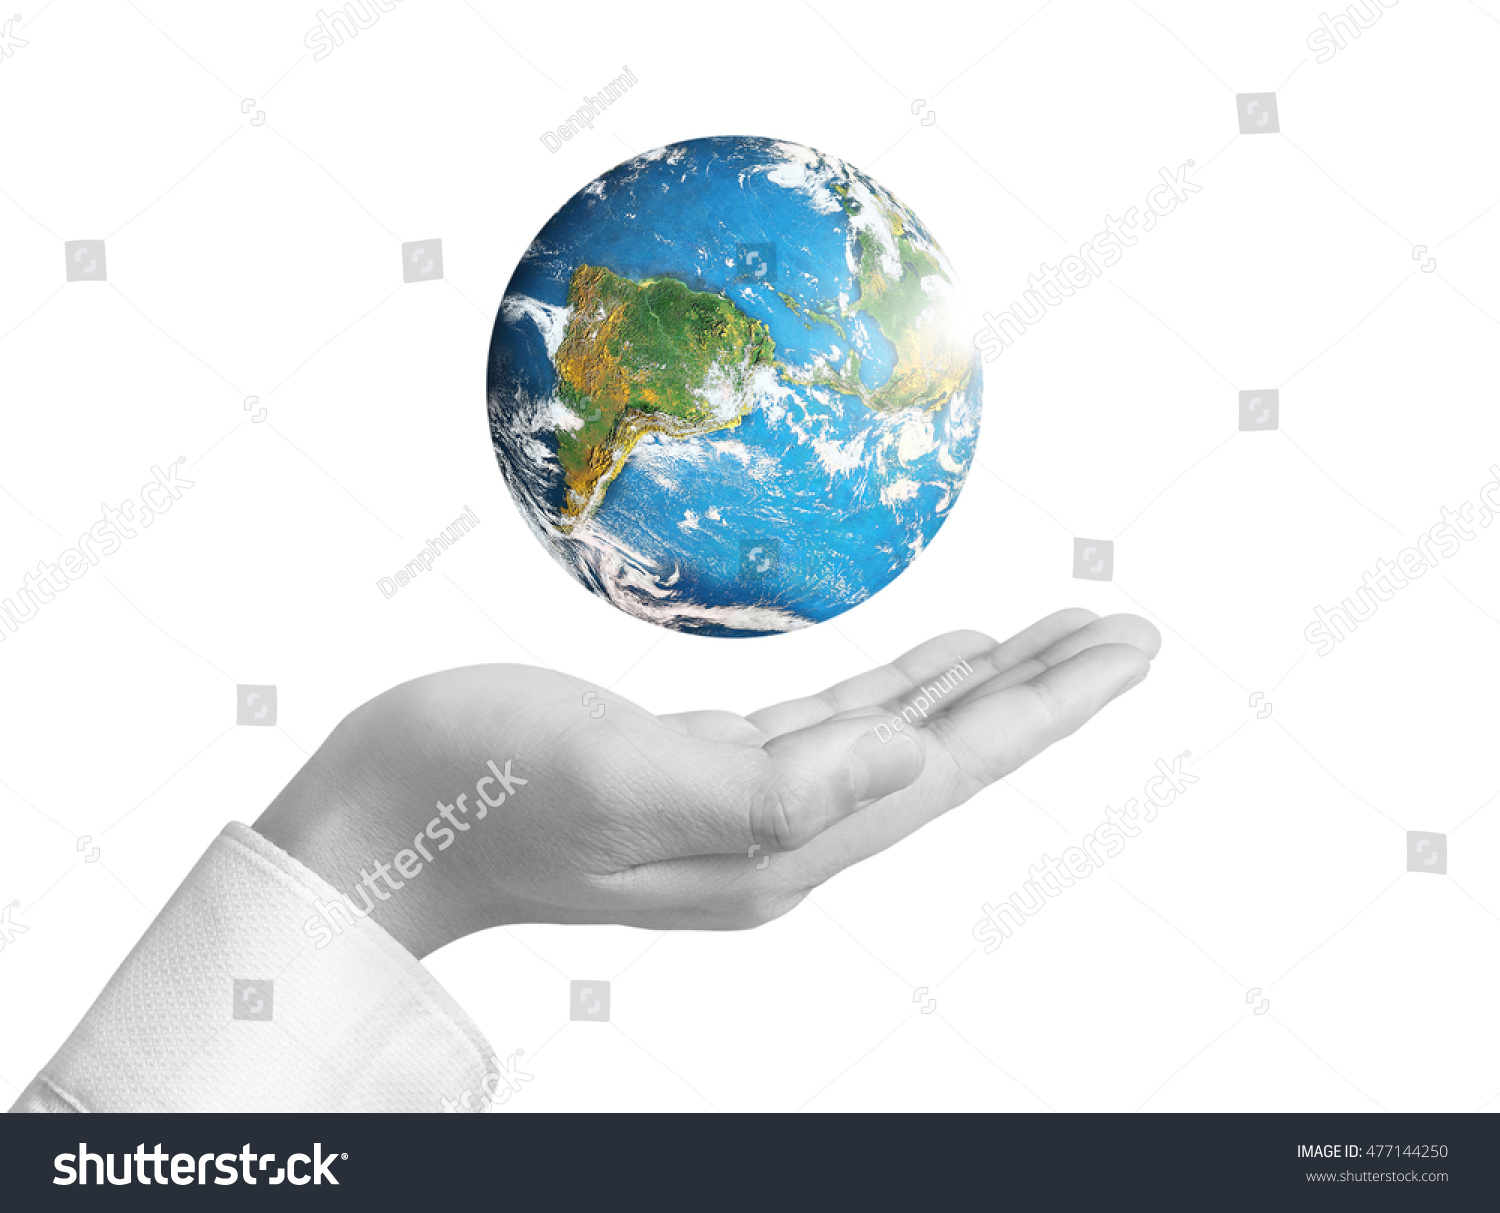 Human hand holding globe Elements of this image furnished by NASA #477144250